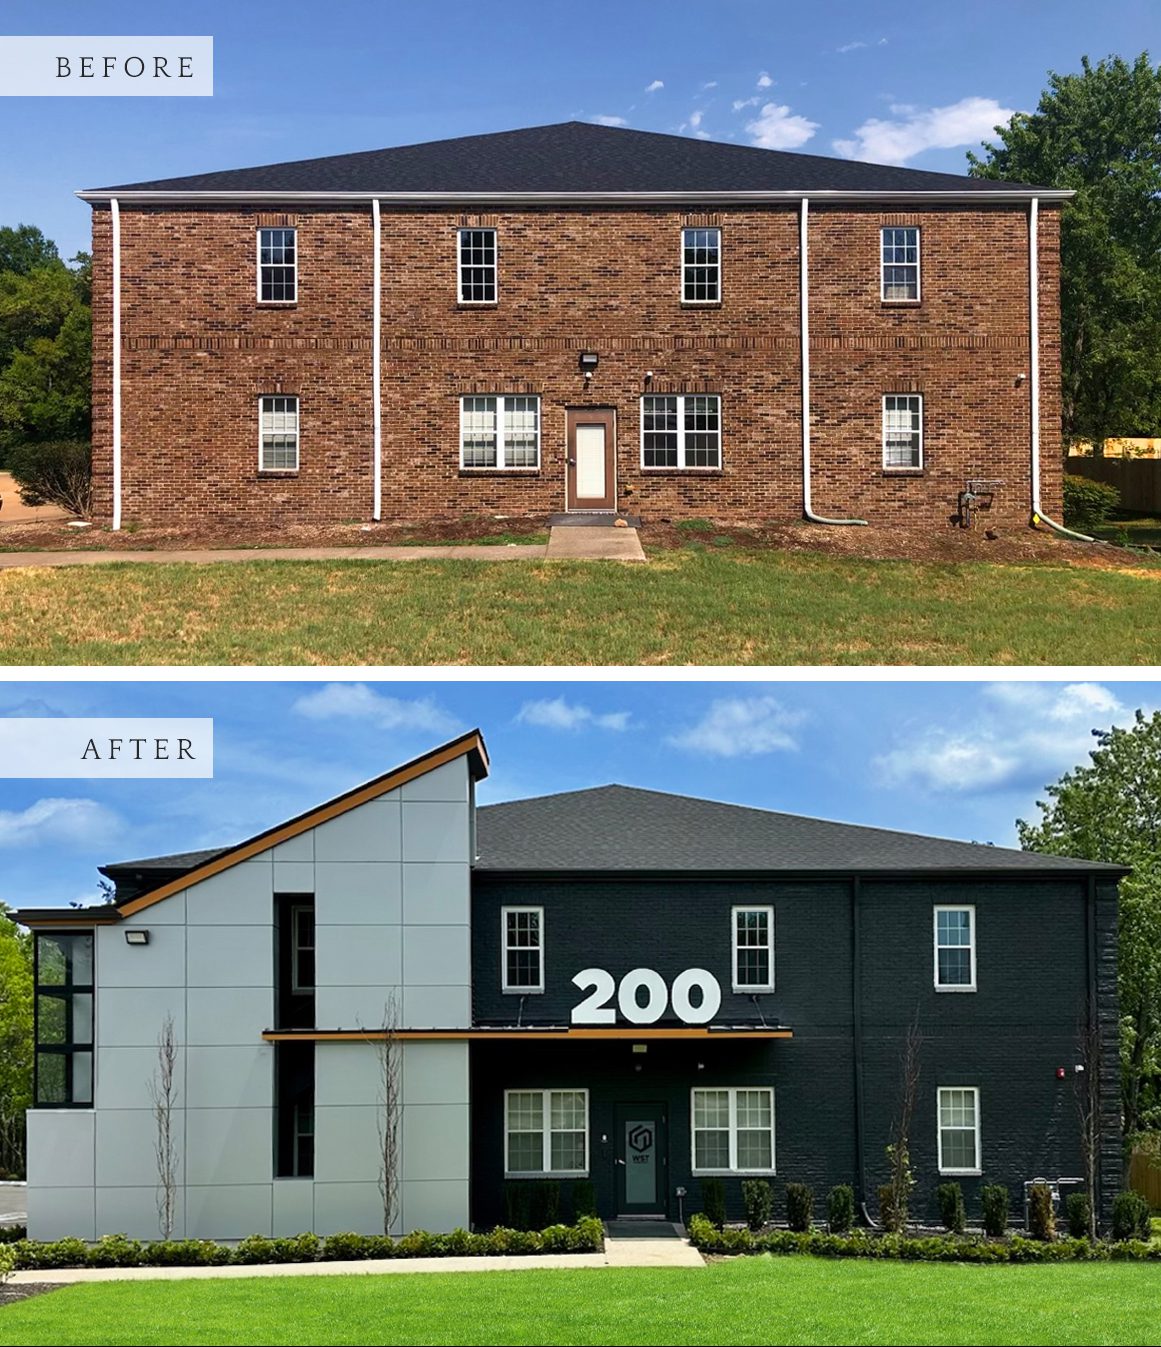 Before and After | Commercial Renovation in Franklin, TN